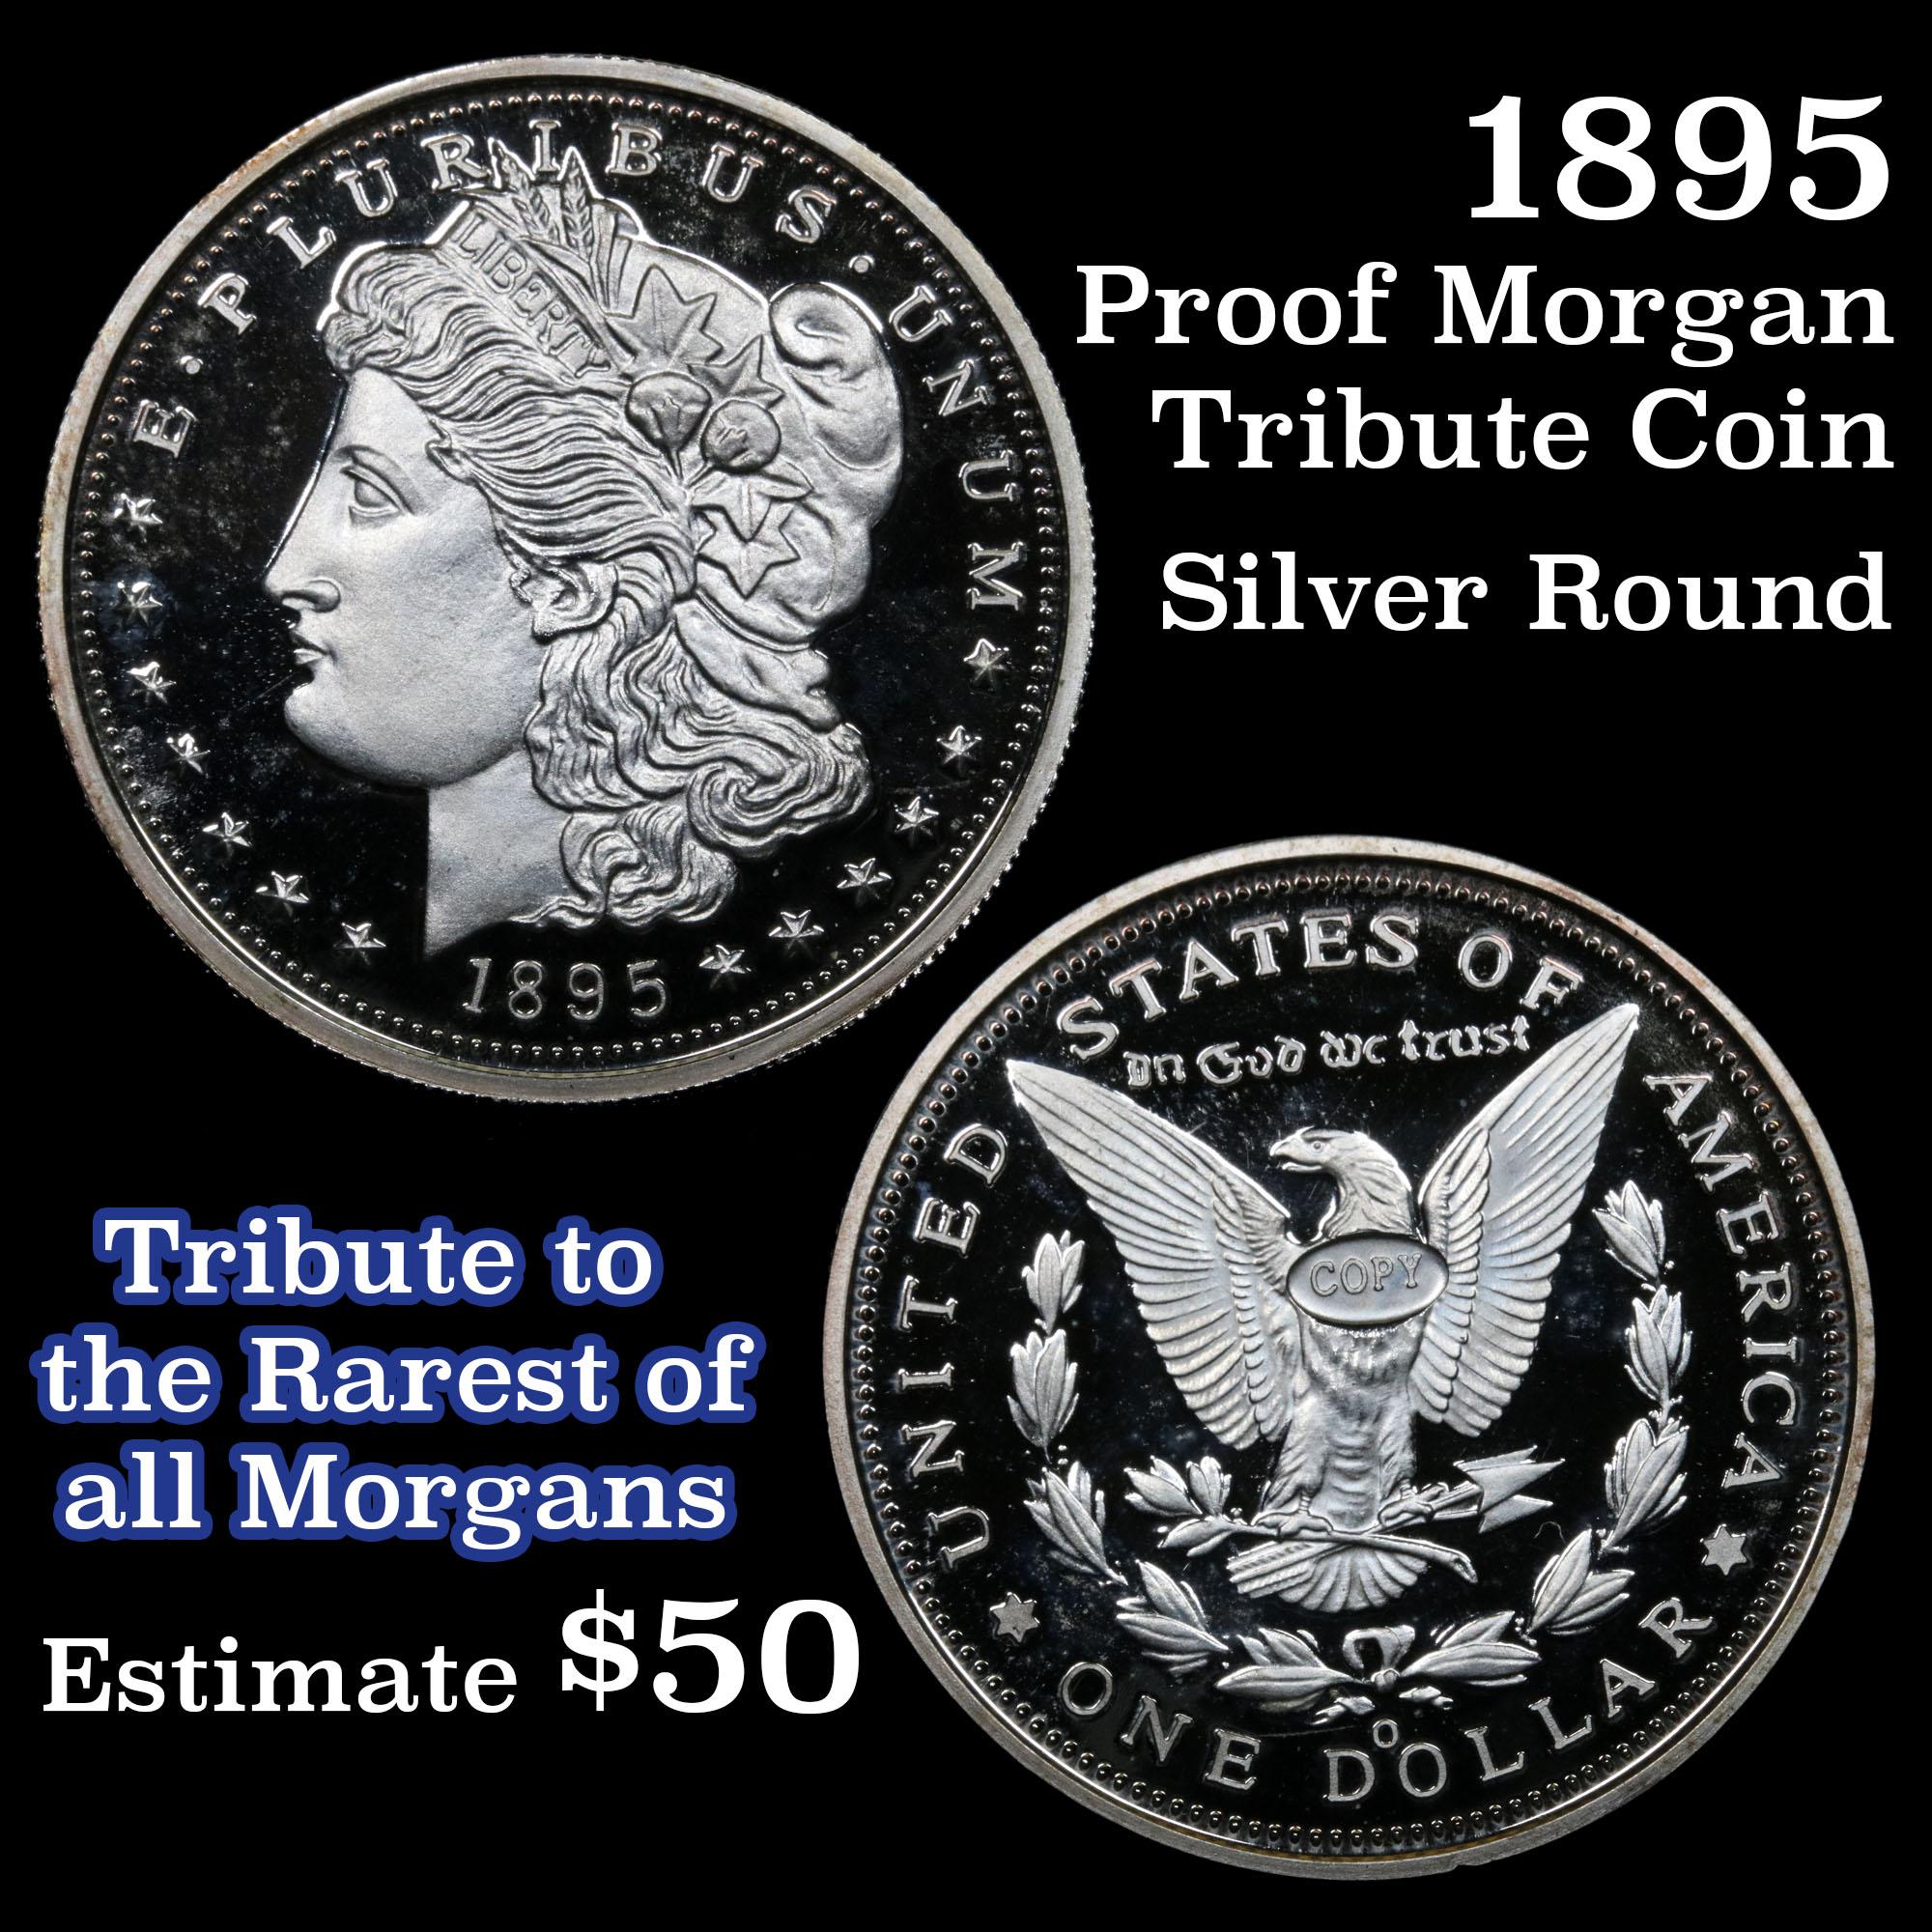 1895 Proof Morgan Tribute Coin